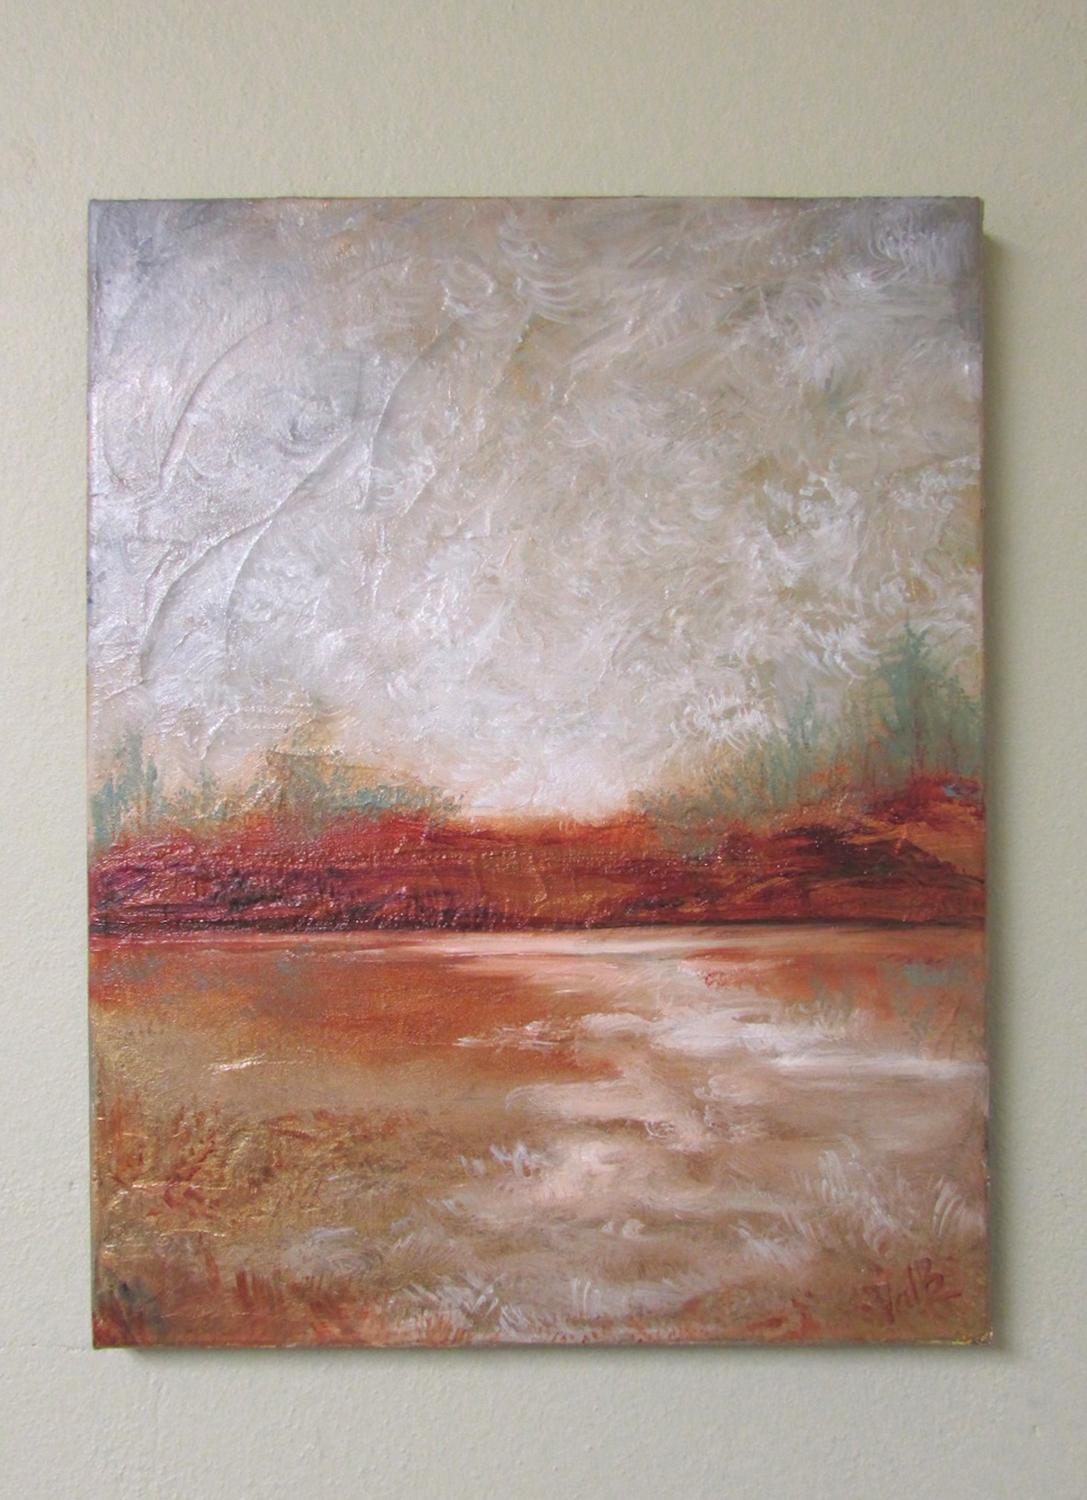 Heavy Skies, Abstract Oil Painting - Brown Abstract Painting by Valerie Berkely